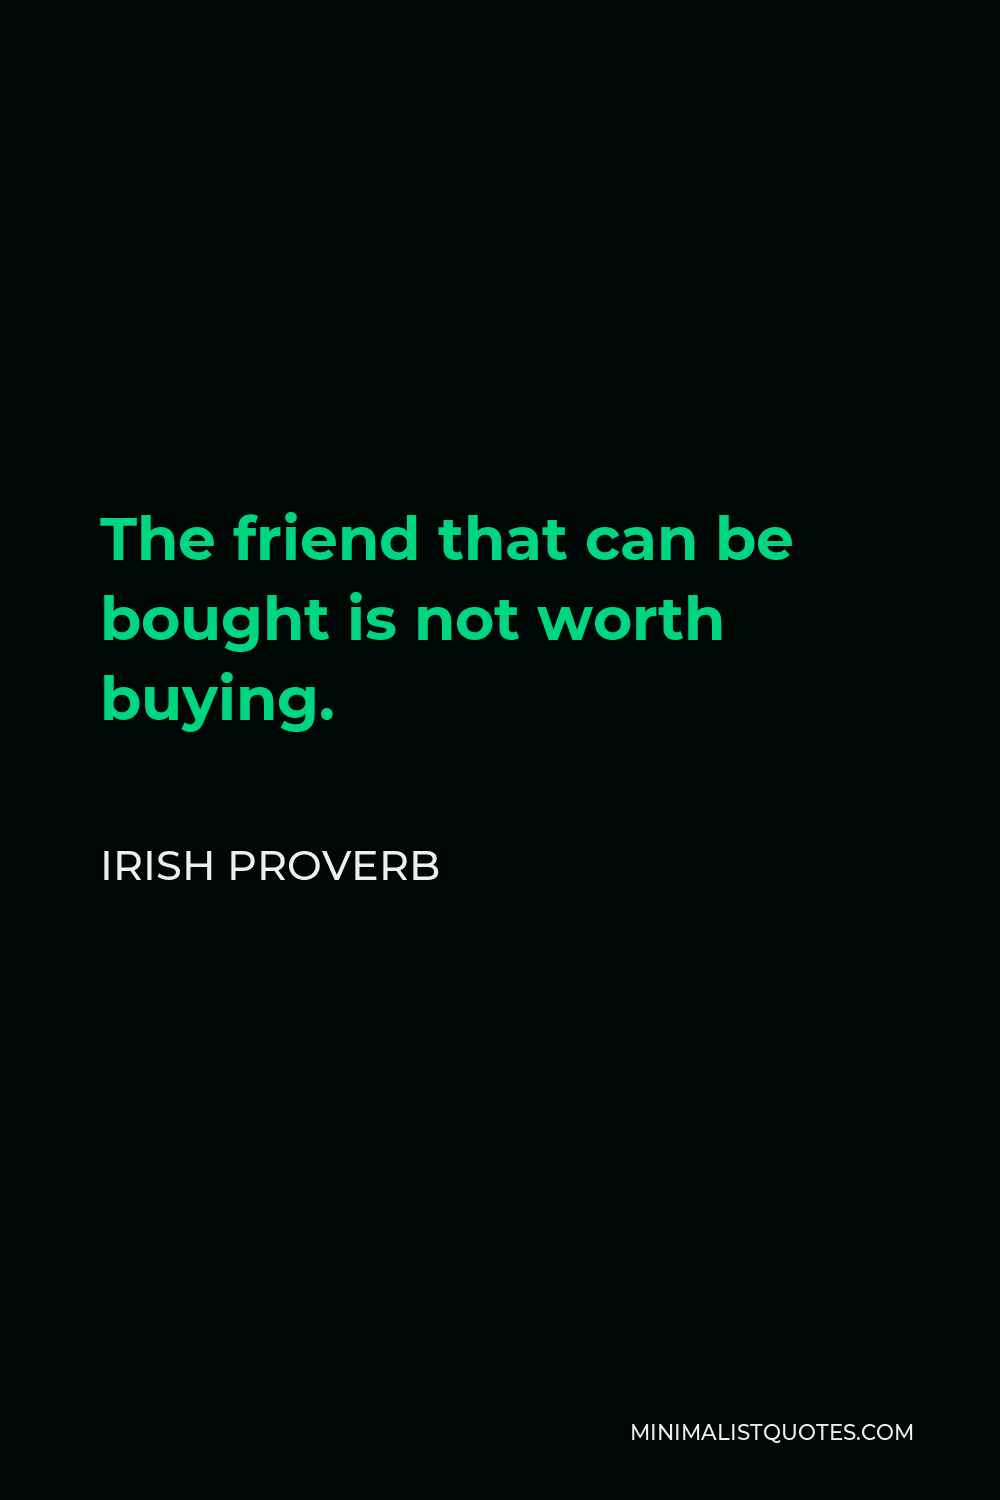 Irish Proverb Quote - The friend that can be bought is not worth buying.